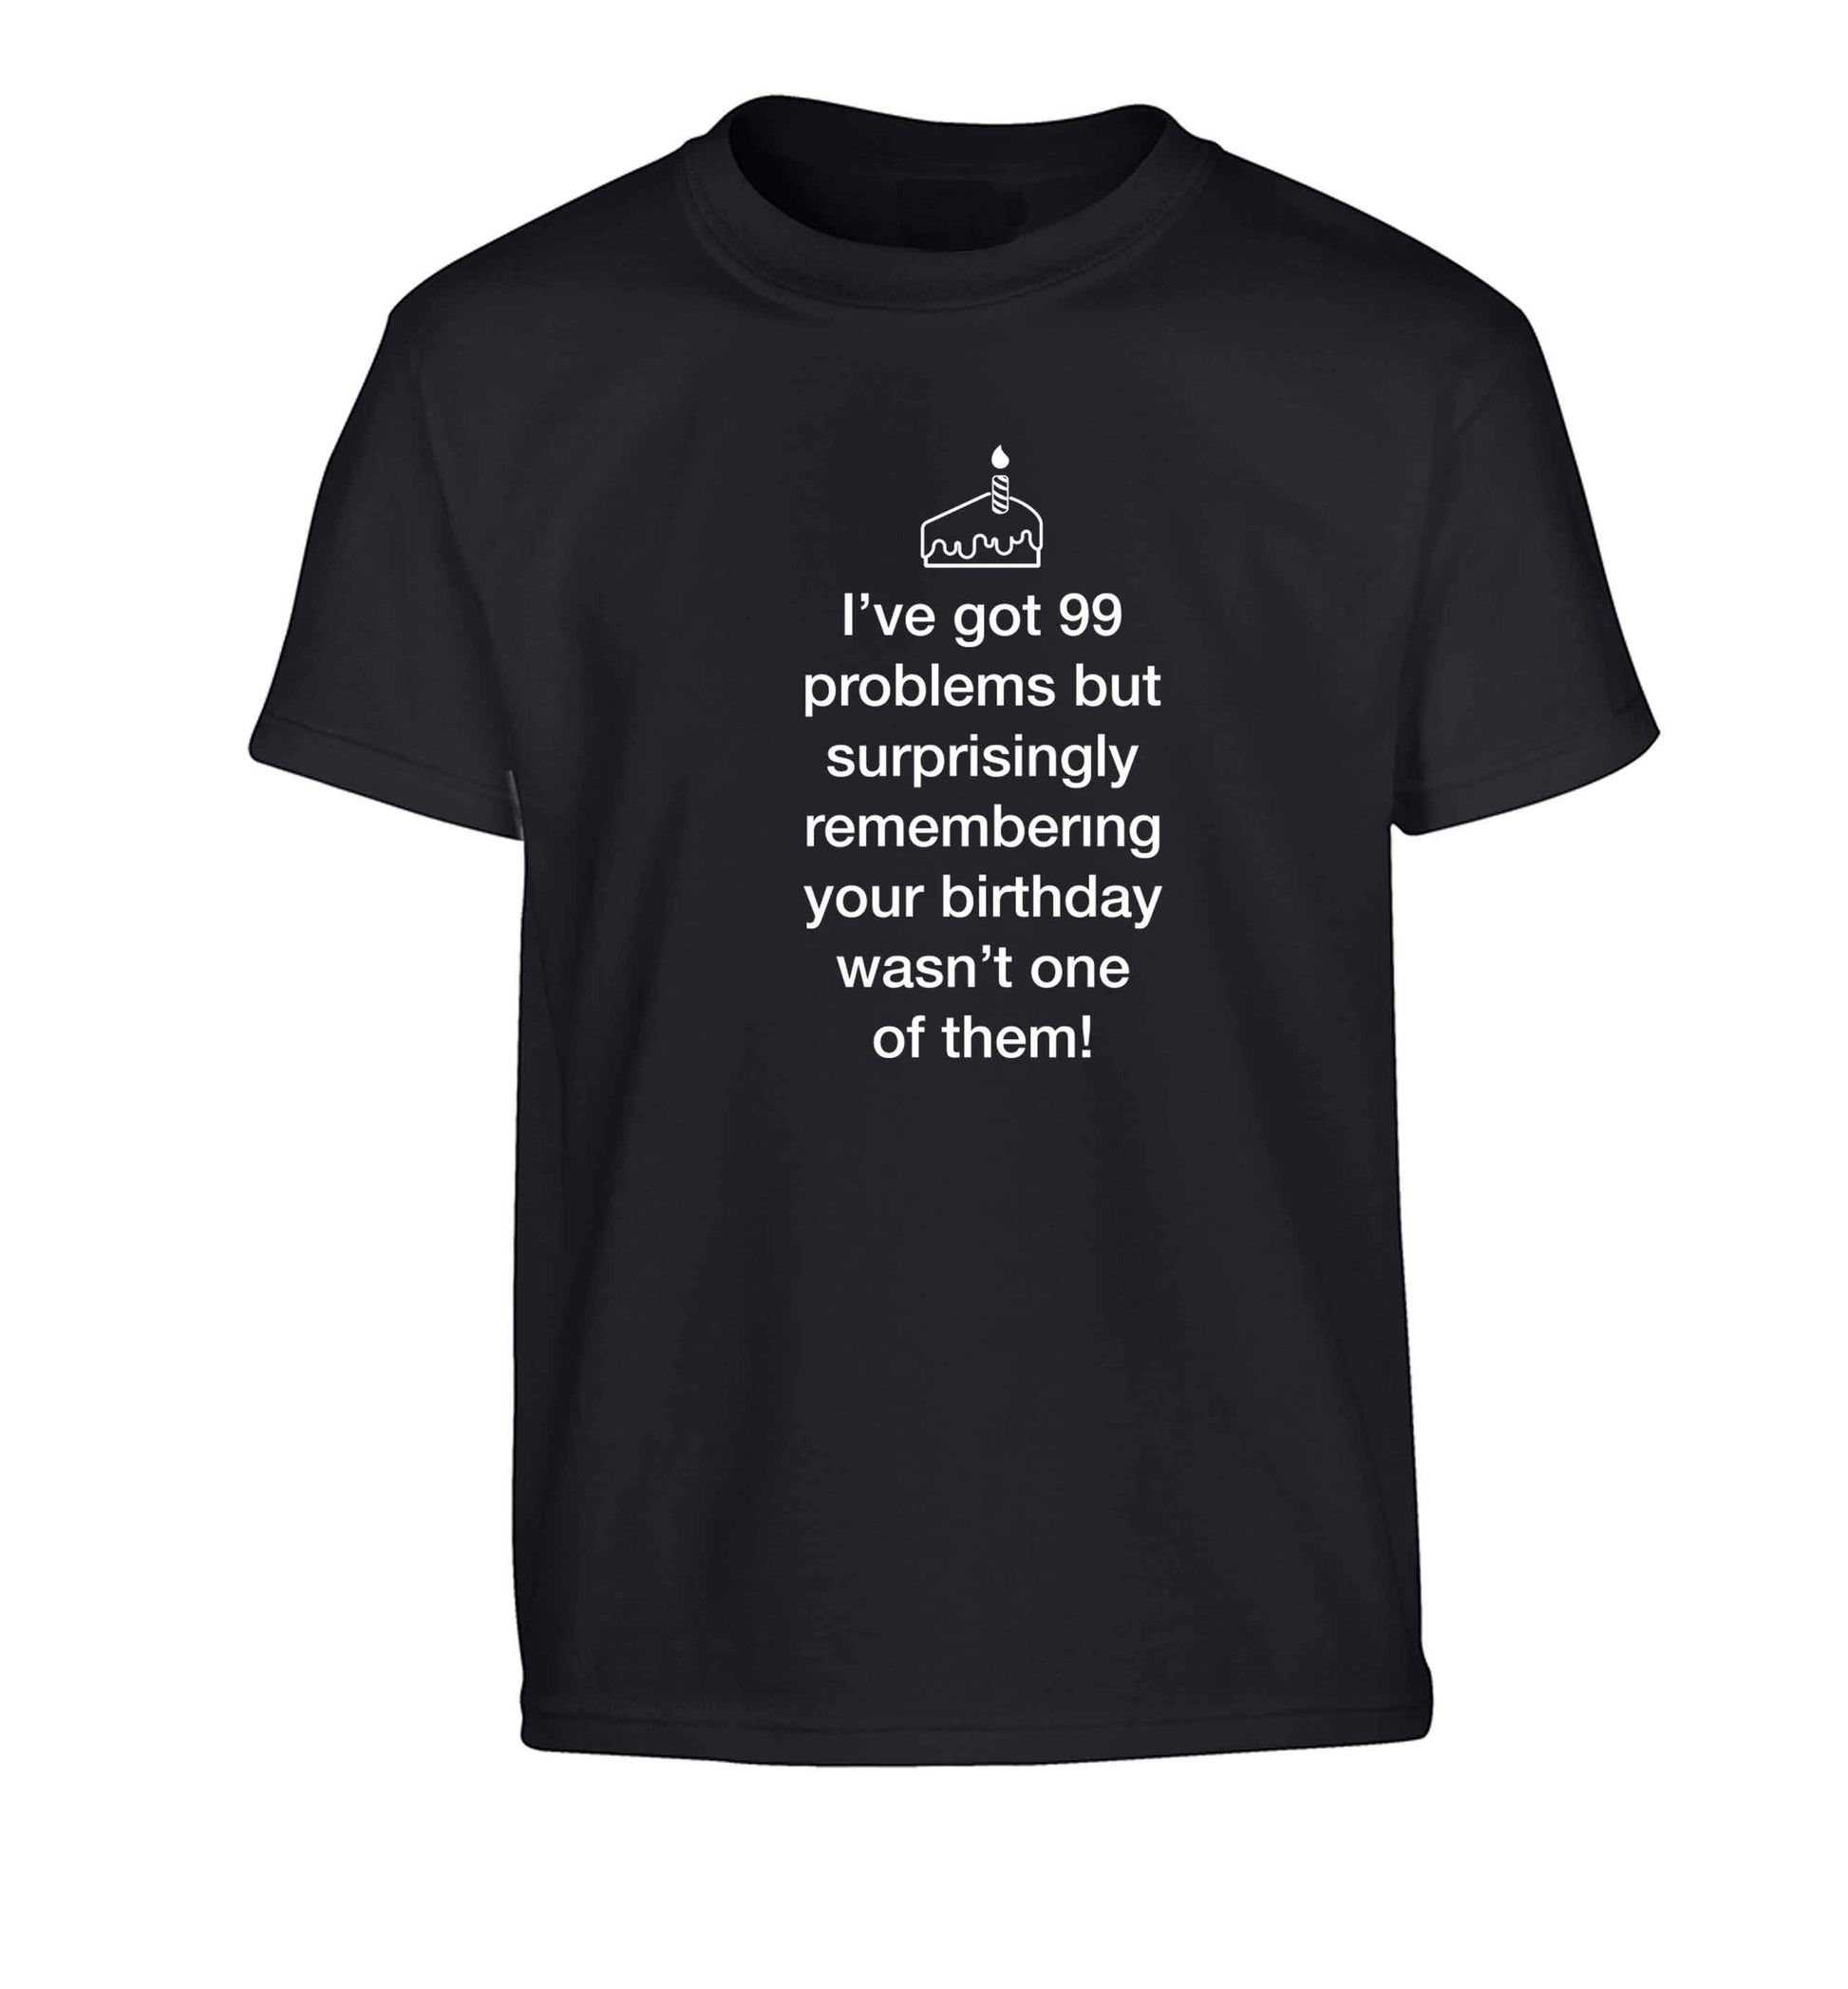 I've got 99 problems but surprisingly remembering your birthday wasn't one of them! Children's black Tshirt 12-13 Years